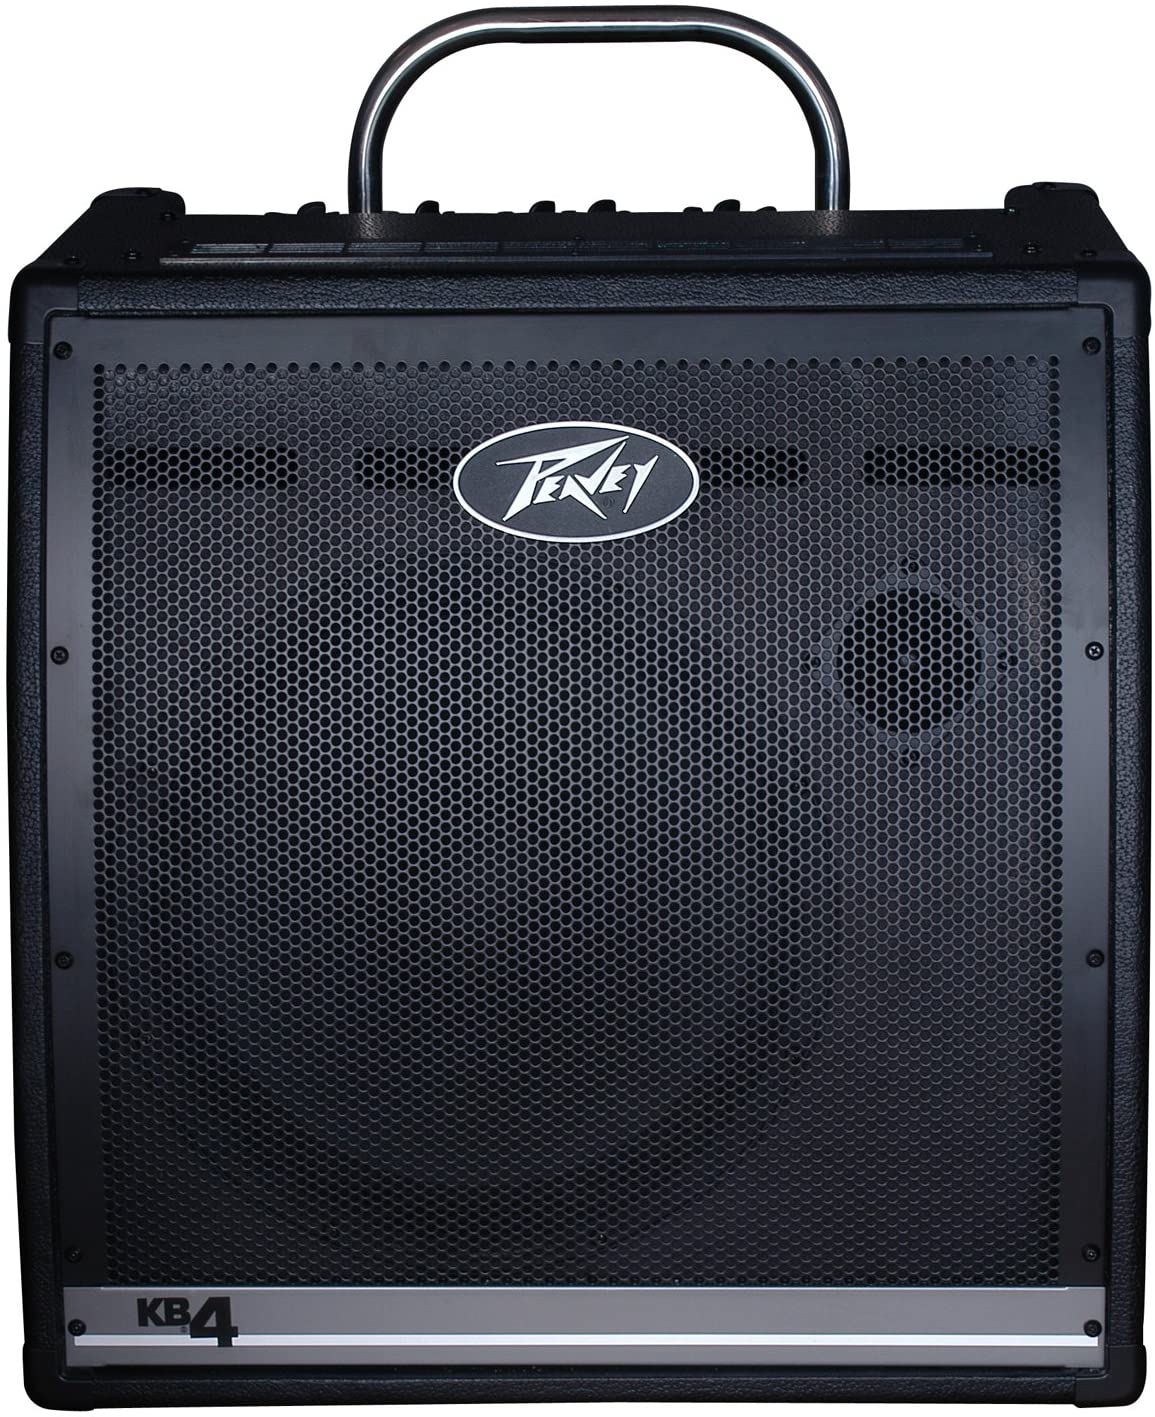 Peavey KB4 Personal PA System and Keyboard Amplifier, 4 Channel, 1x15, 100w